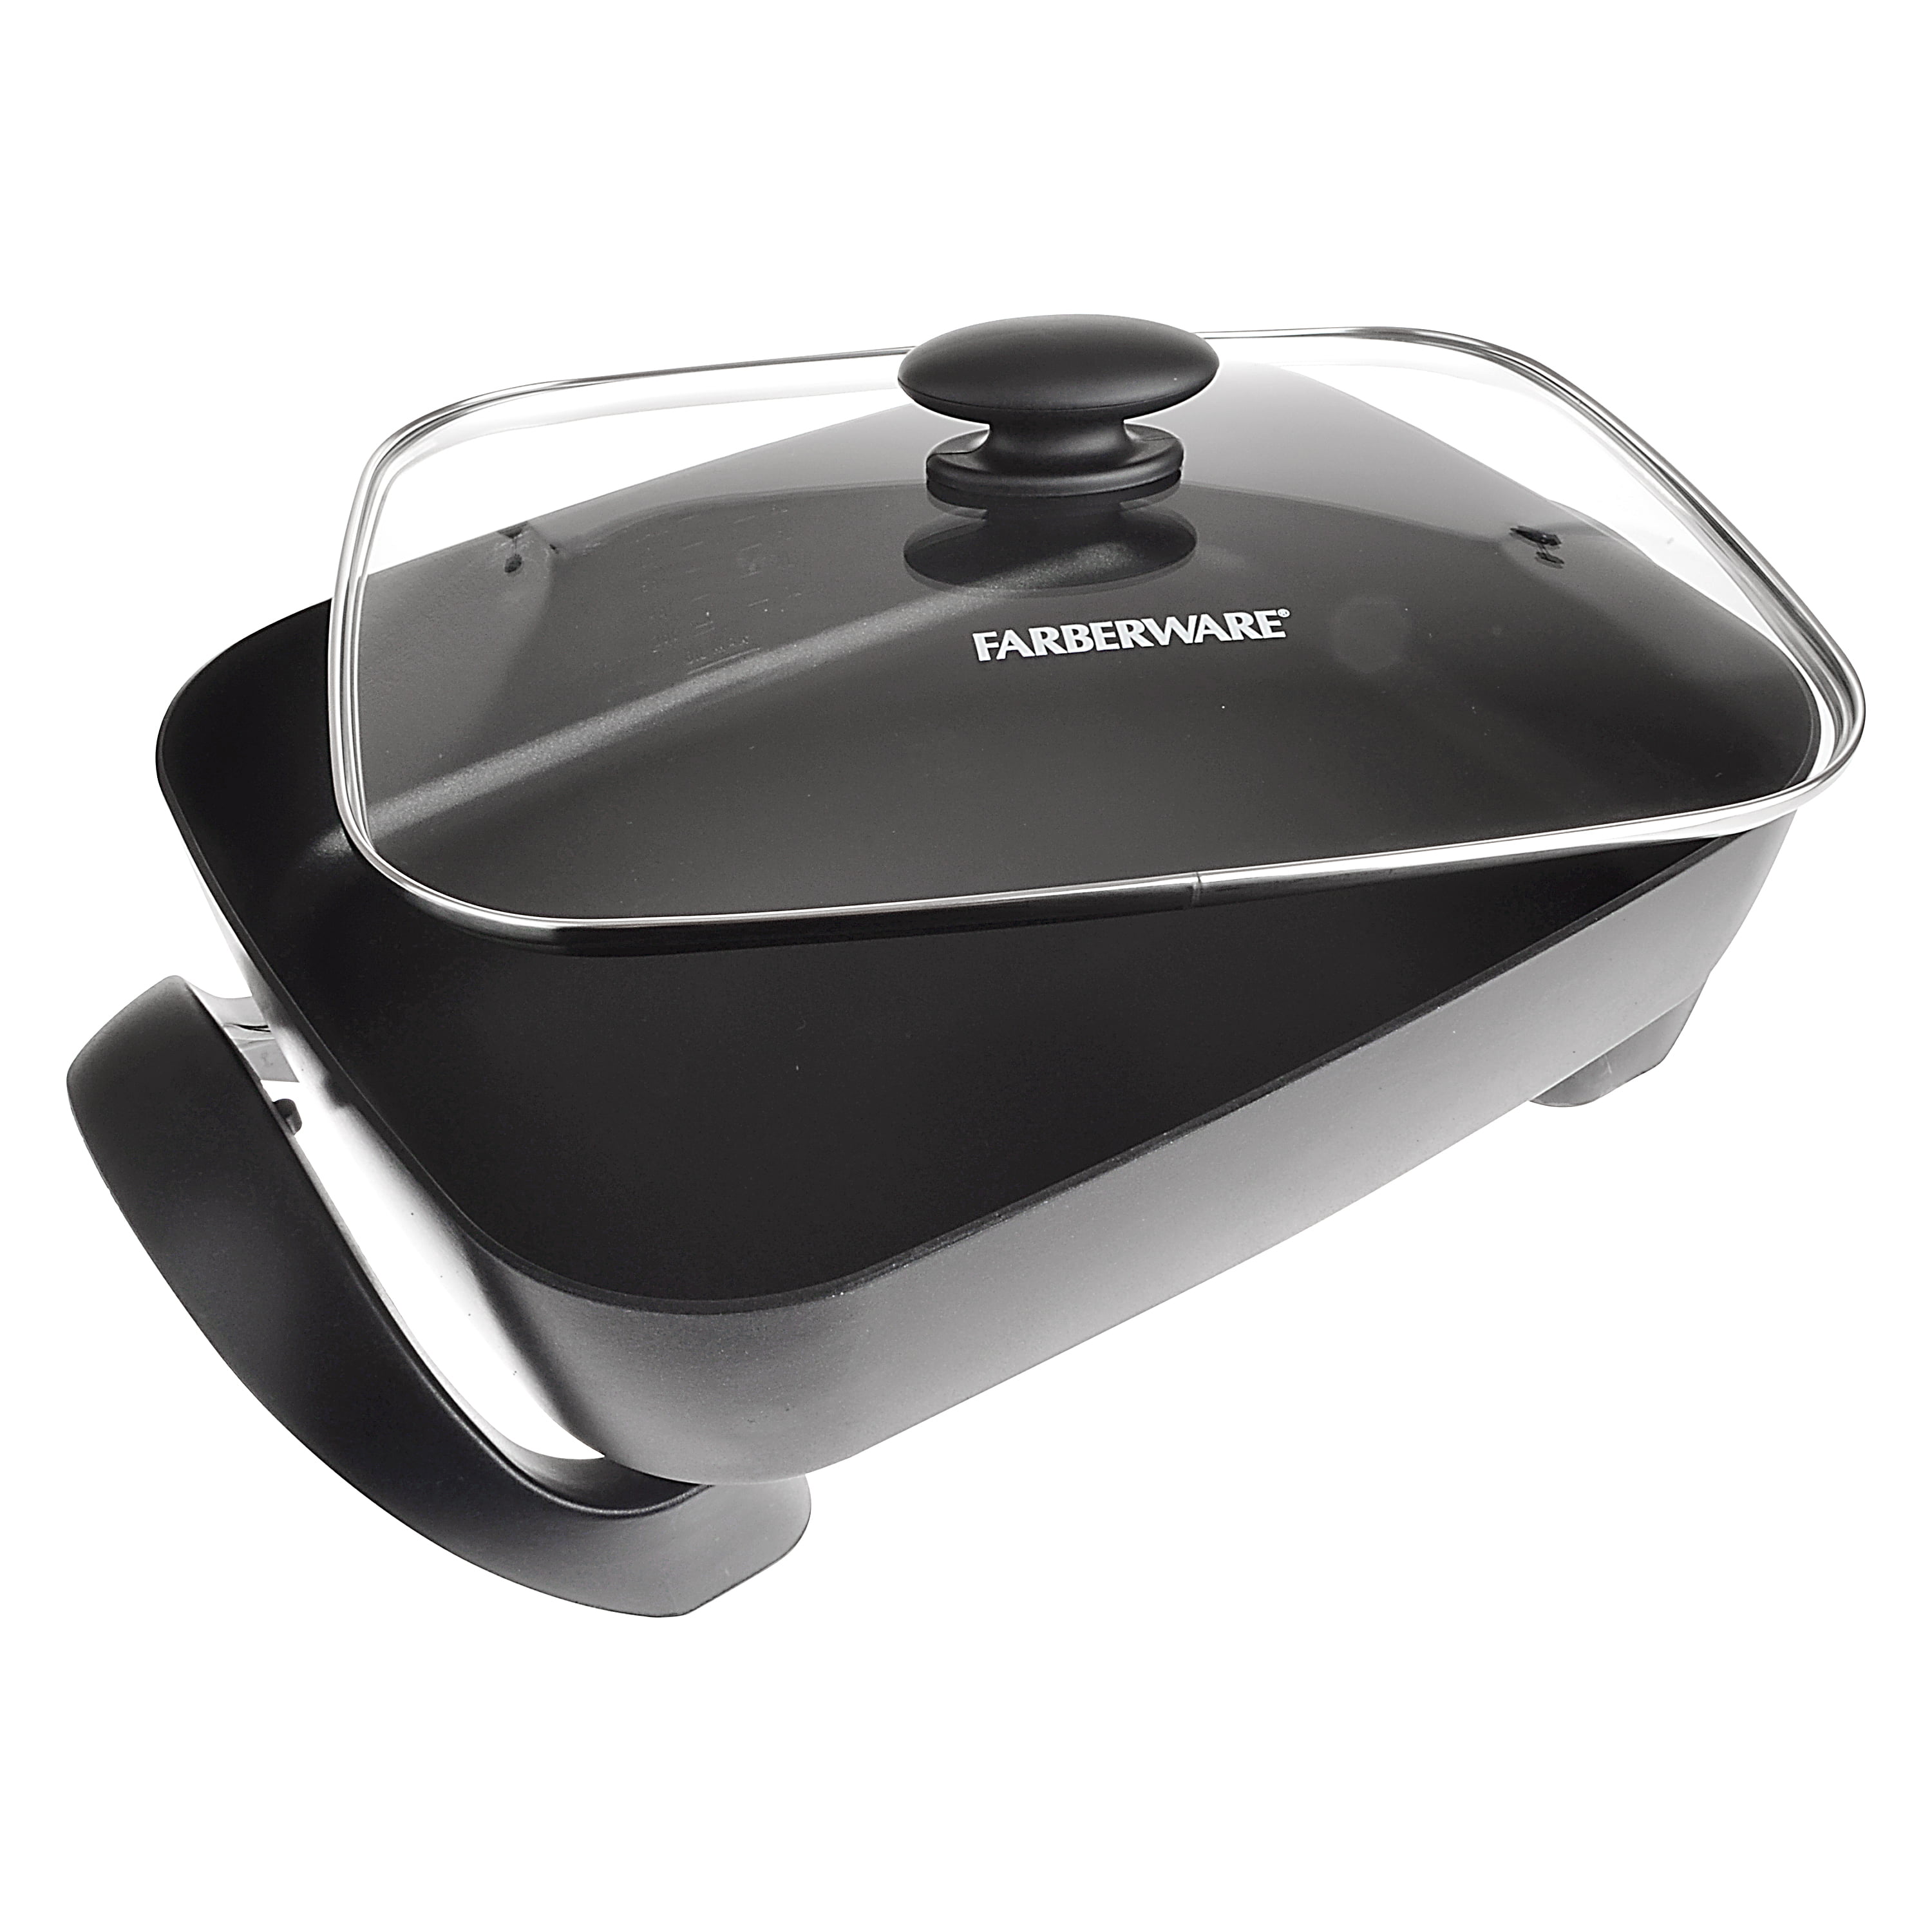 Farberware electric fry pan - appliances - by owner - sale